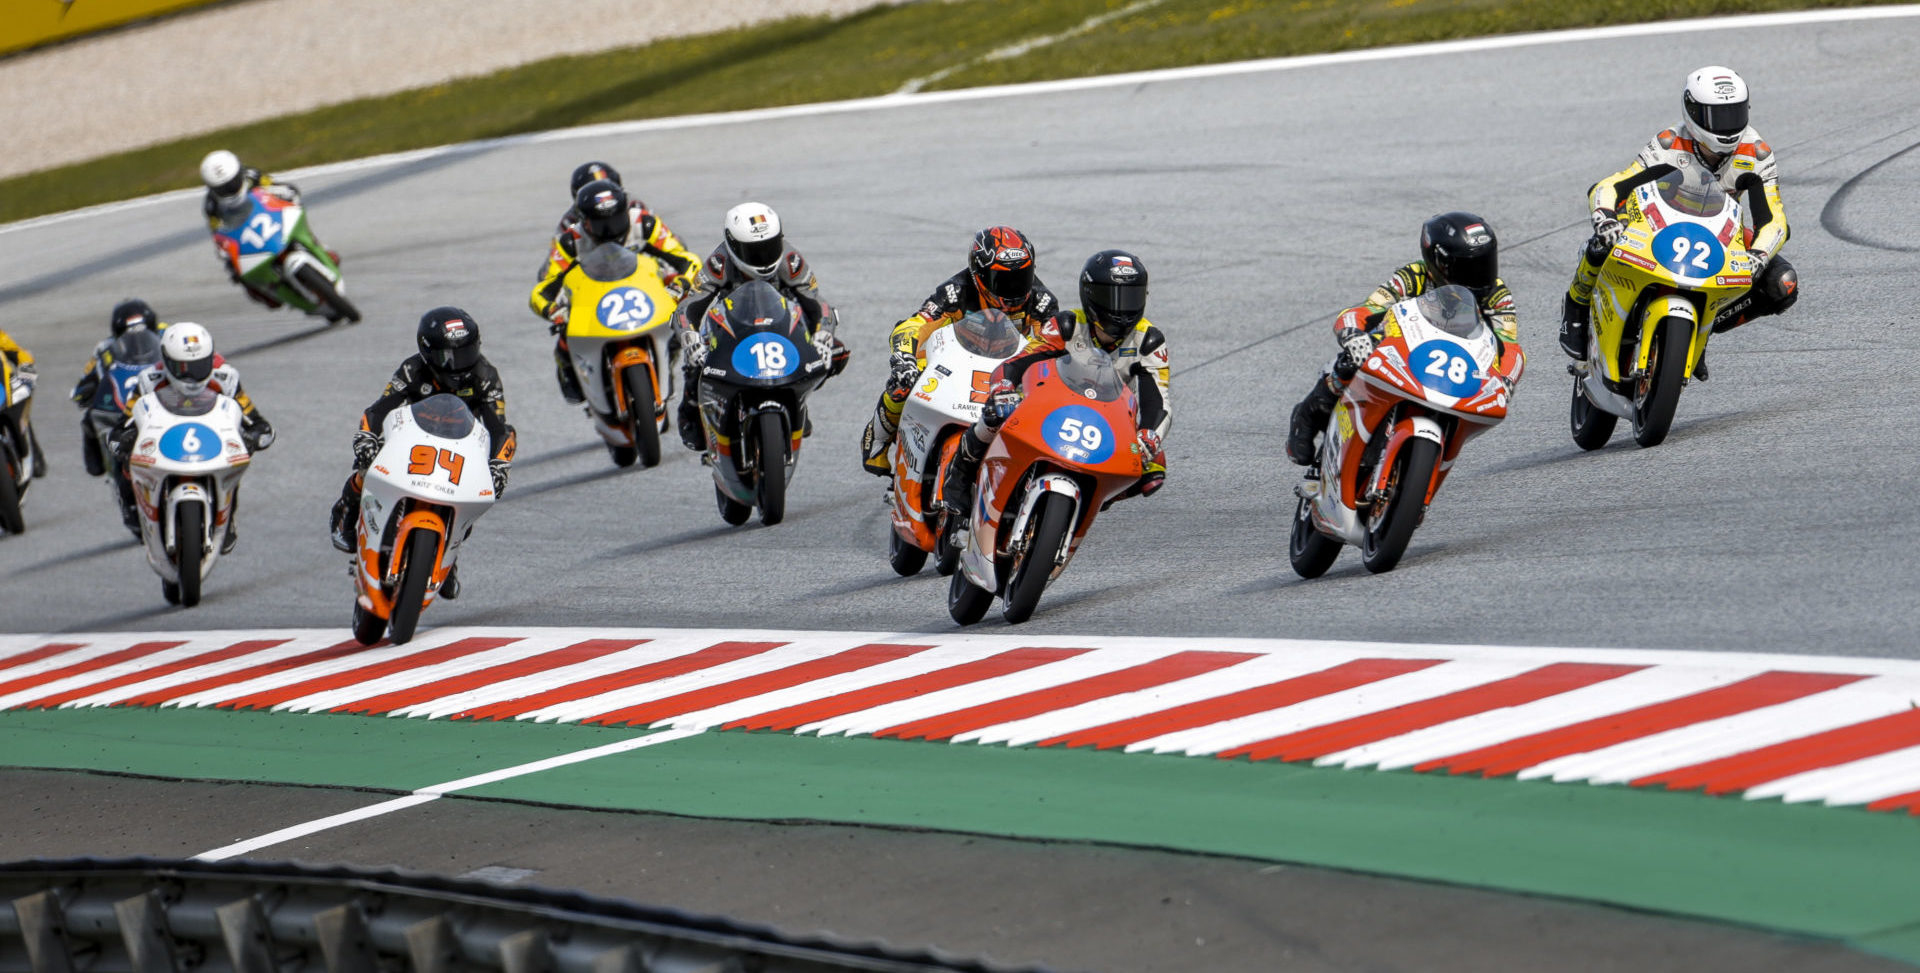 Kevin Farkas (28) leads Jakub Gurecky (59), Hungarian-American Rossi Moor (92), and the rest of the Northern Talent Cup field at the start of Race Two at Red Bull Ring. FIM and Dorna officials are raising the minimum age for racers competing on Grand Prix tracks. Photo courtesy Dorna.